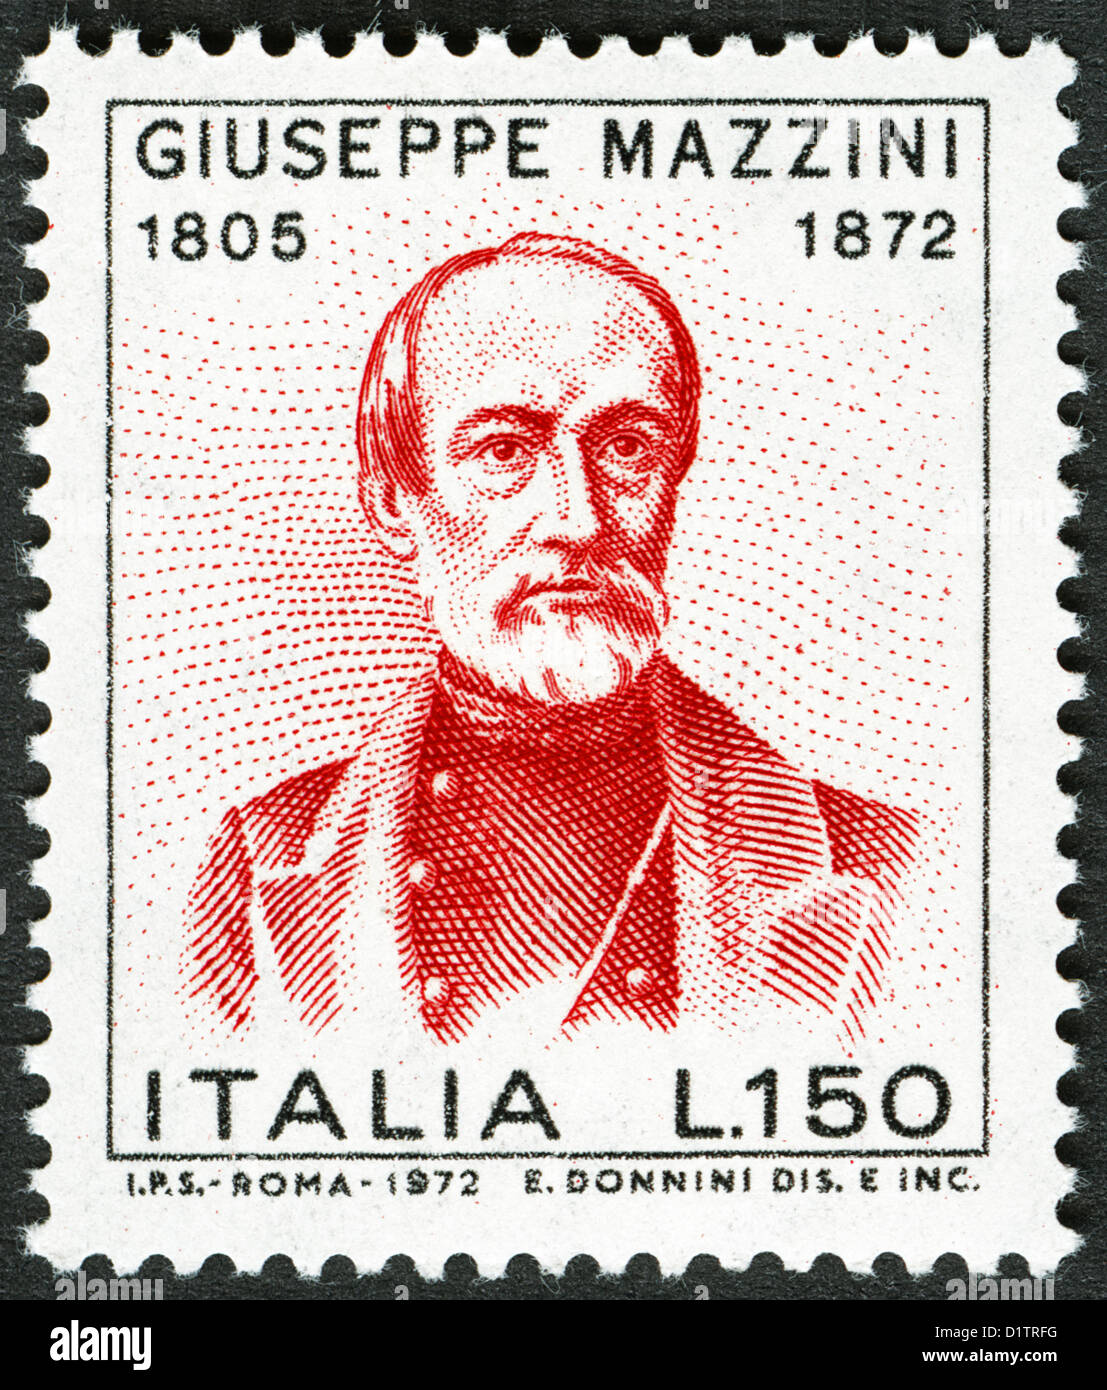 Giuseppe Mazzini (22 June 1805 – 10 March 1872),Italian politician, journalist and activist for the unification of Italy. Stock Photo